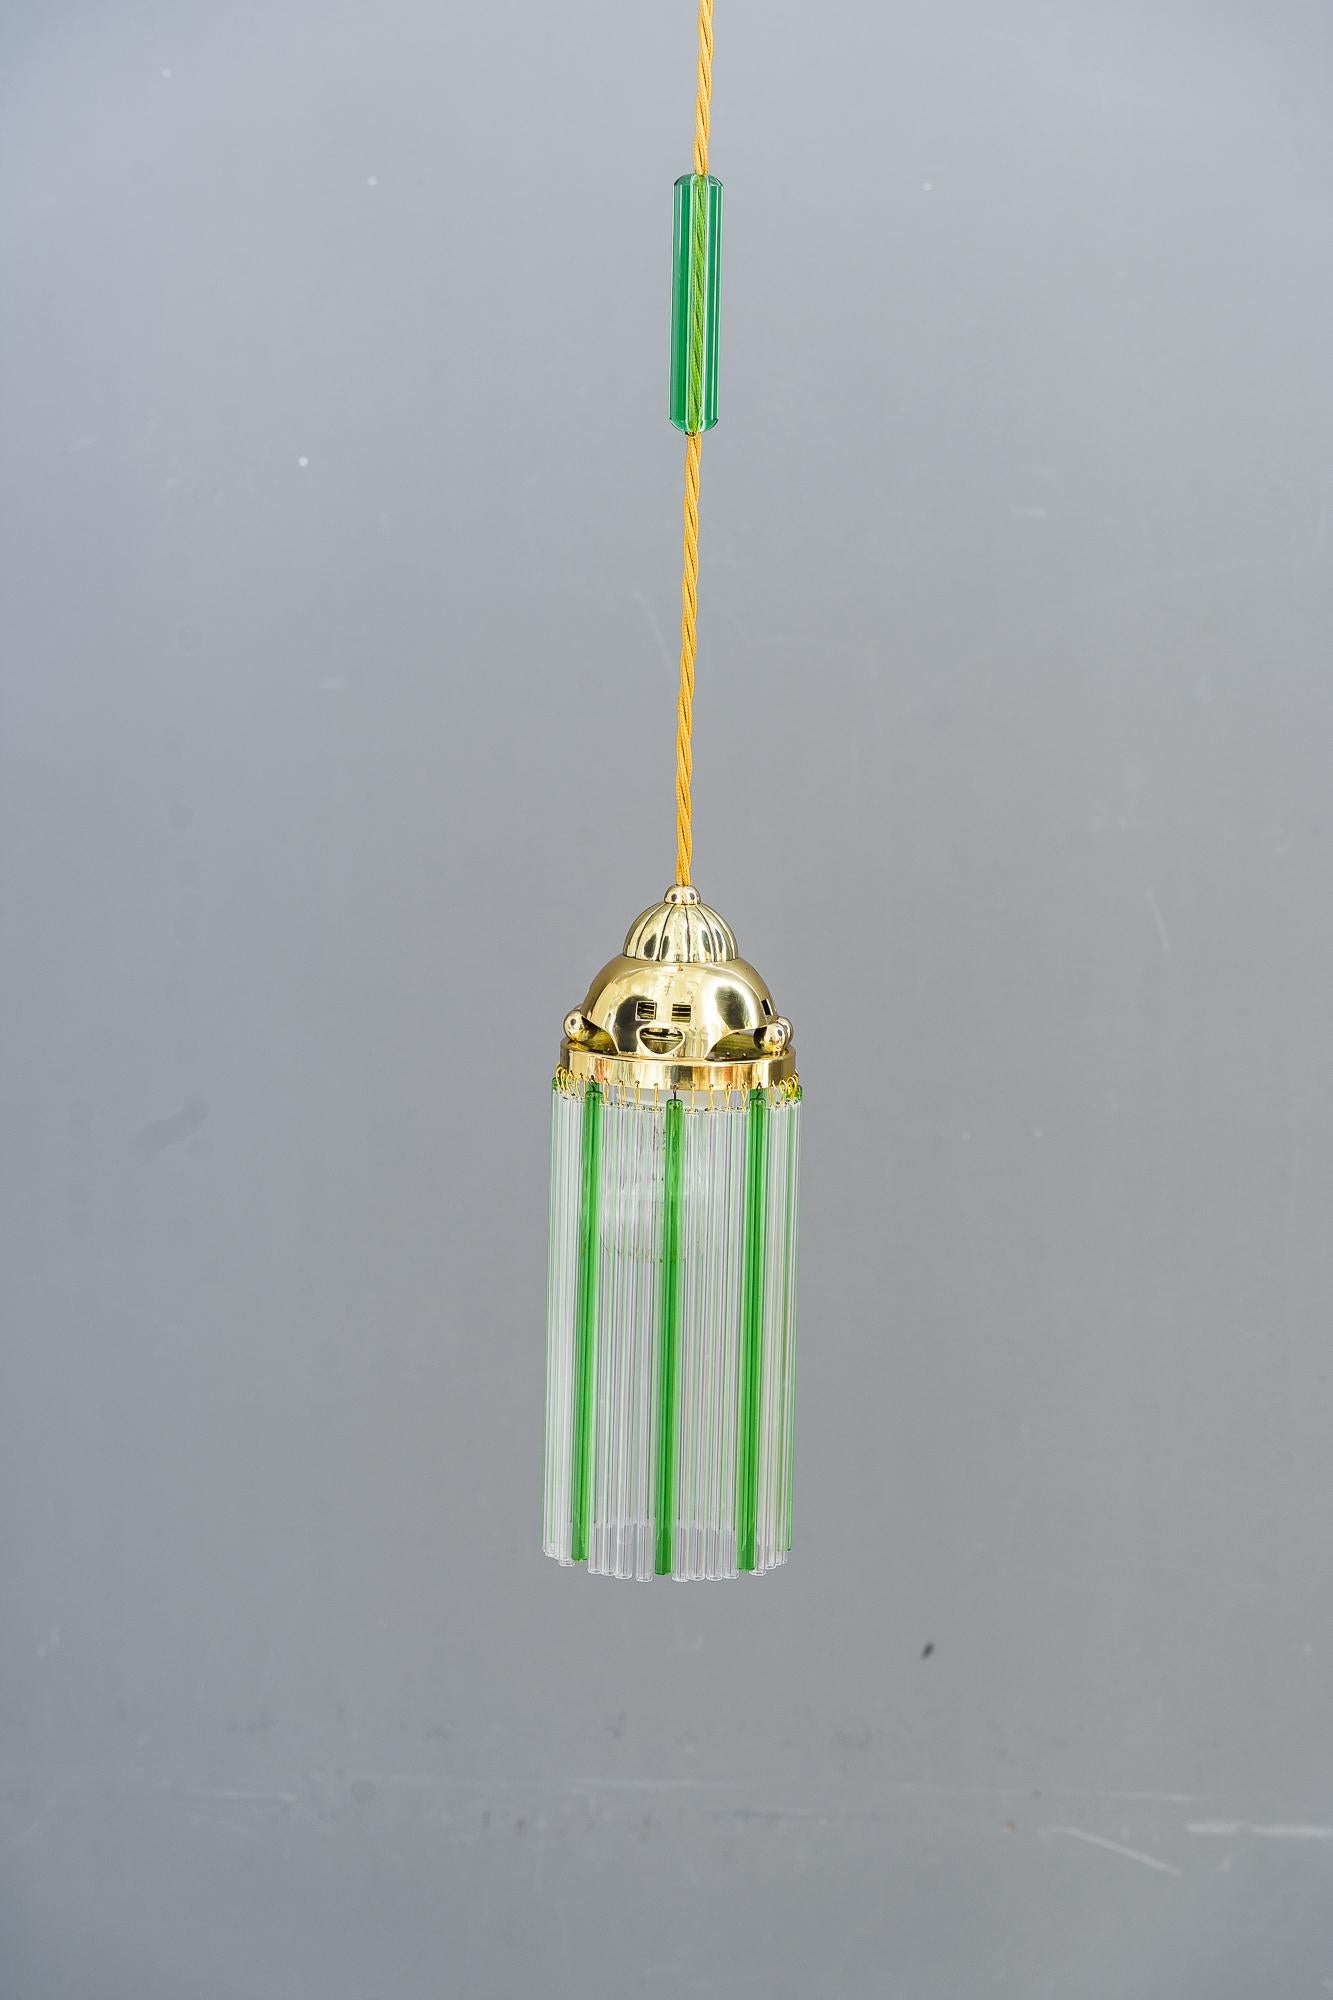 2 Art Deco pendants vienna around 1920s
The green glass is original old 
The transparent white glass sticks are replaced (new)